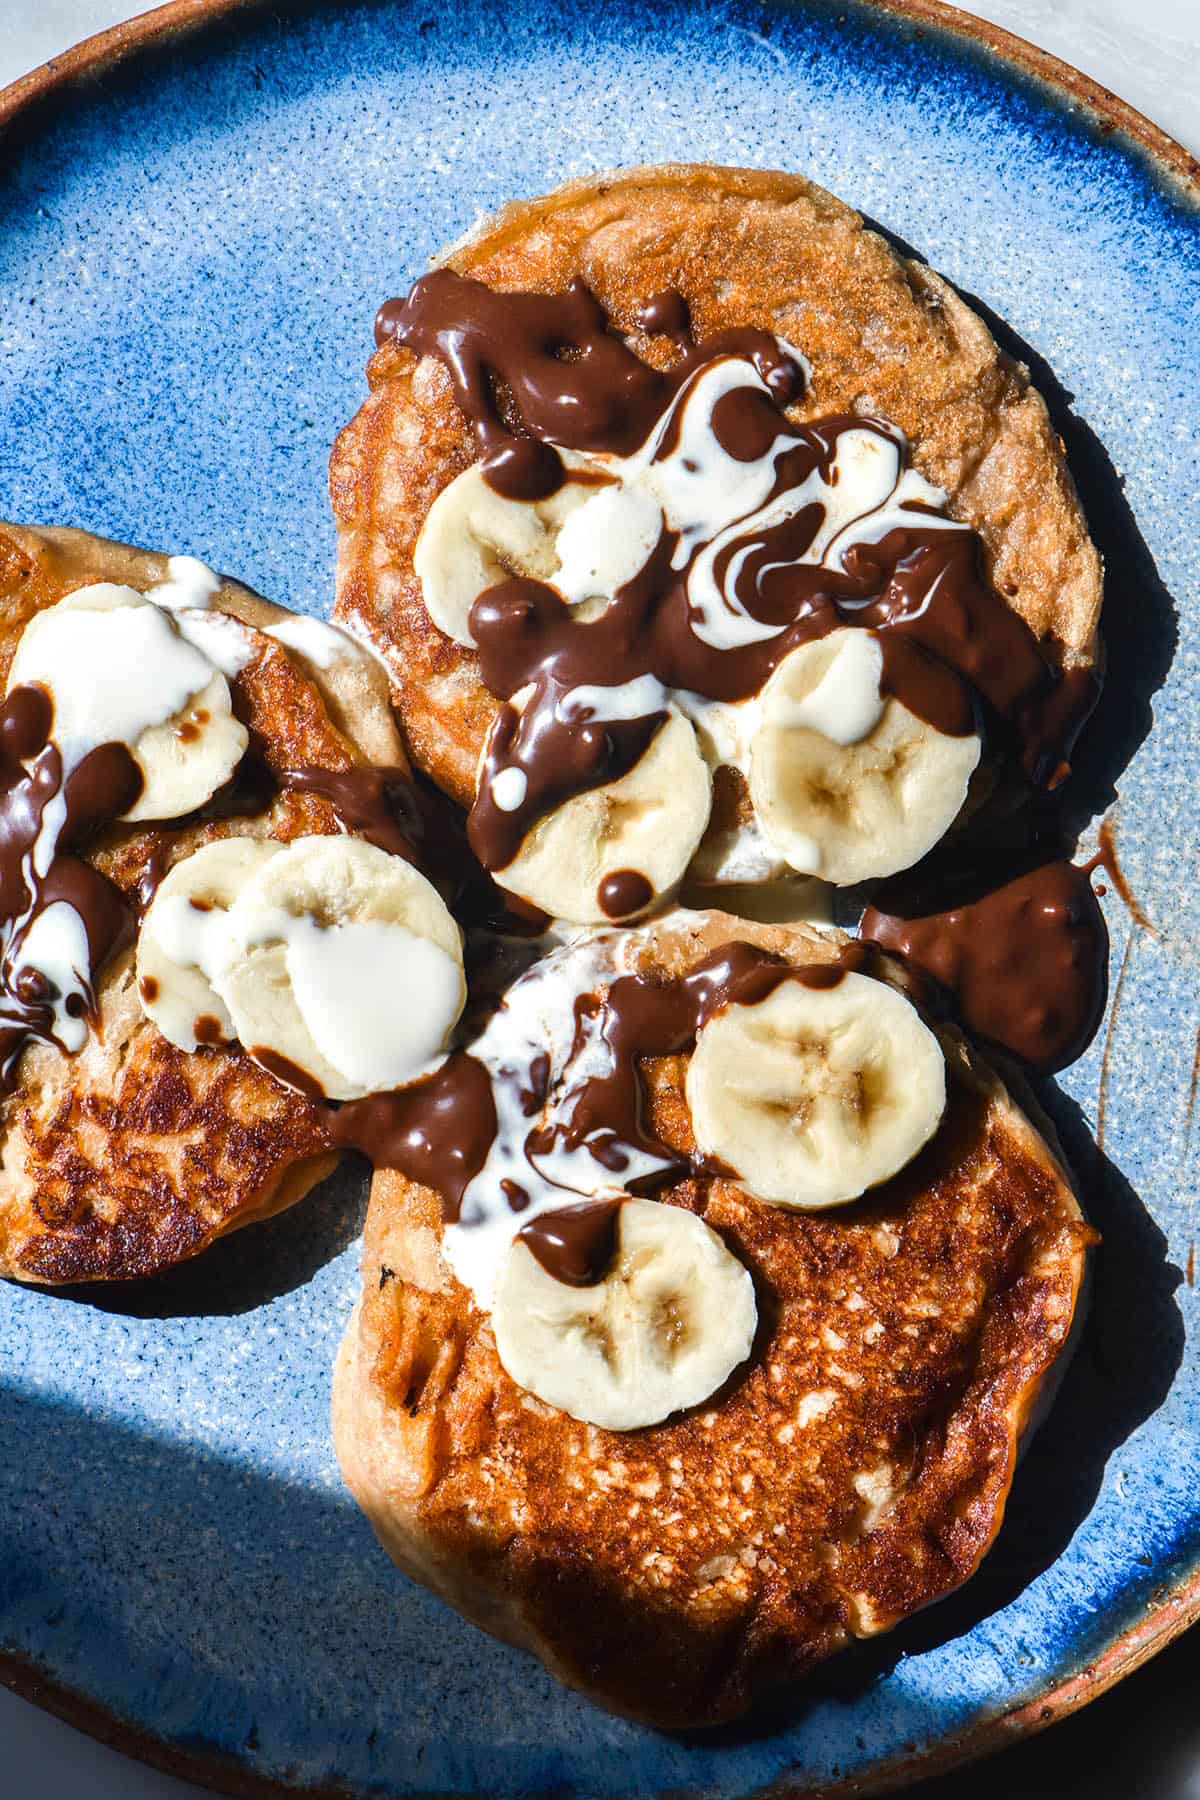 An aerial view of three gluten free vegan protein pancakes on a bright blue plate in bright sunlight. The pancakes are topped with vegan nutella, coconut cream and extra slices of banana